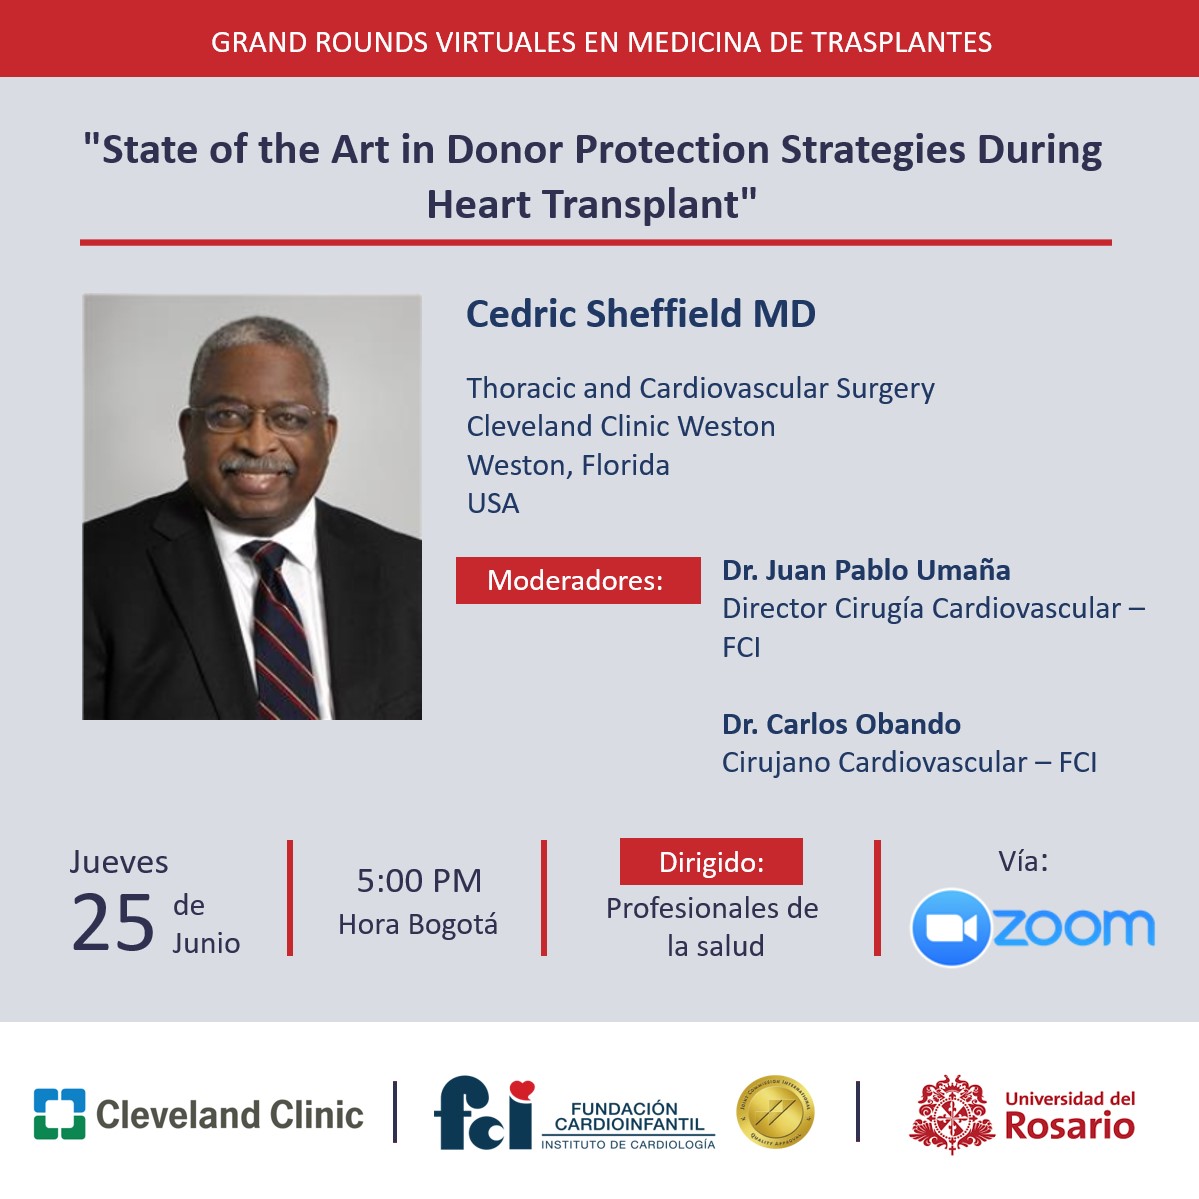 Grand Rounds en Medicina de Trasplantes: State of the Art in Donor Protection Strategies During Heart Transplant